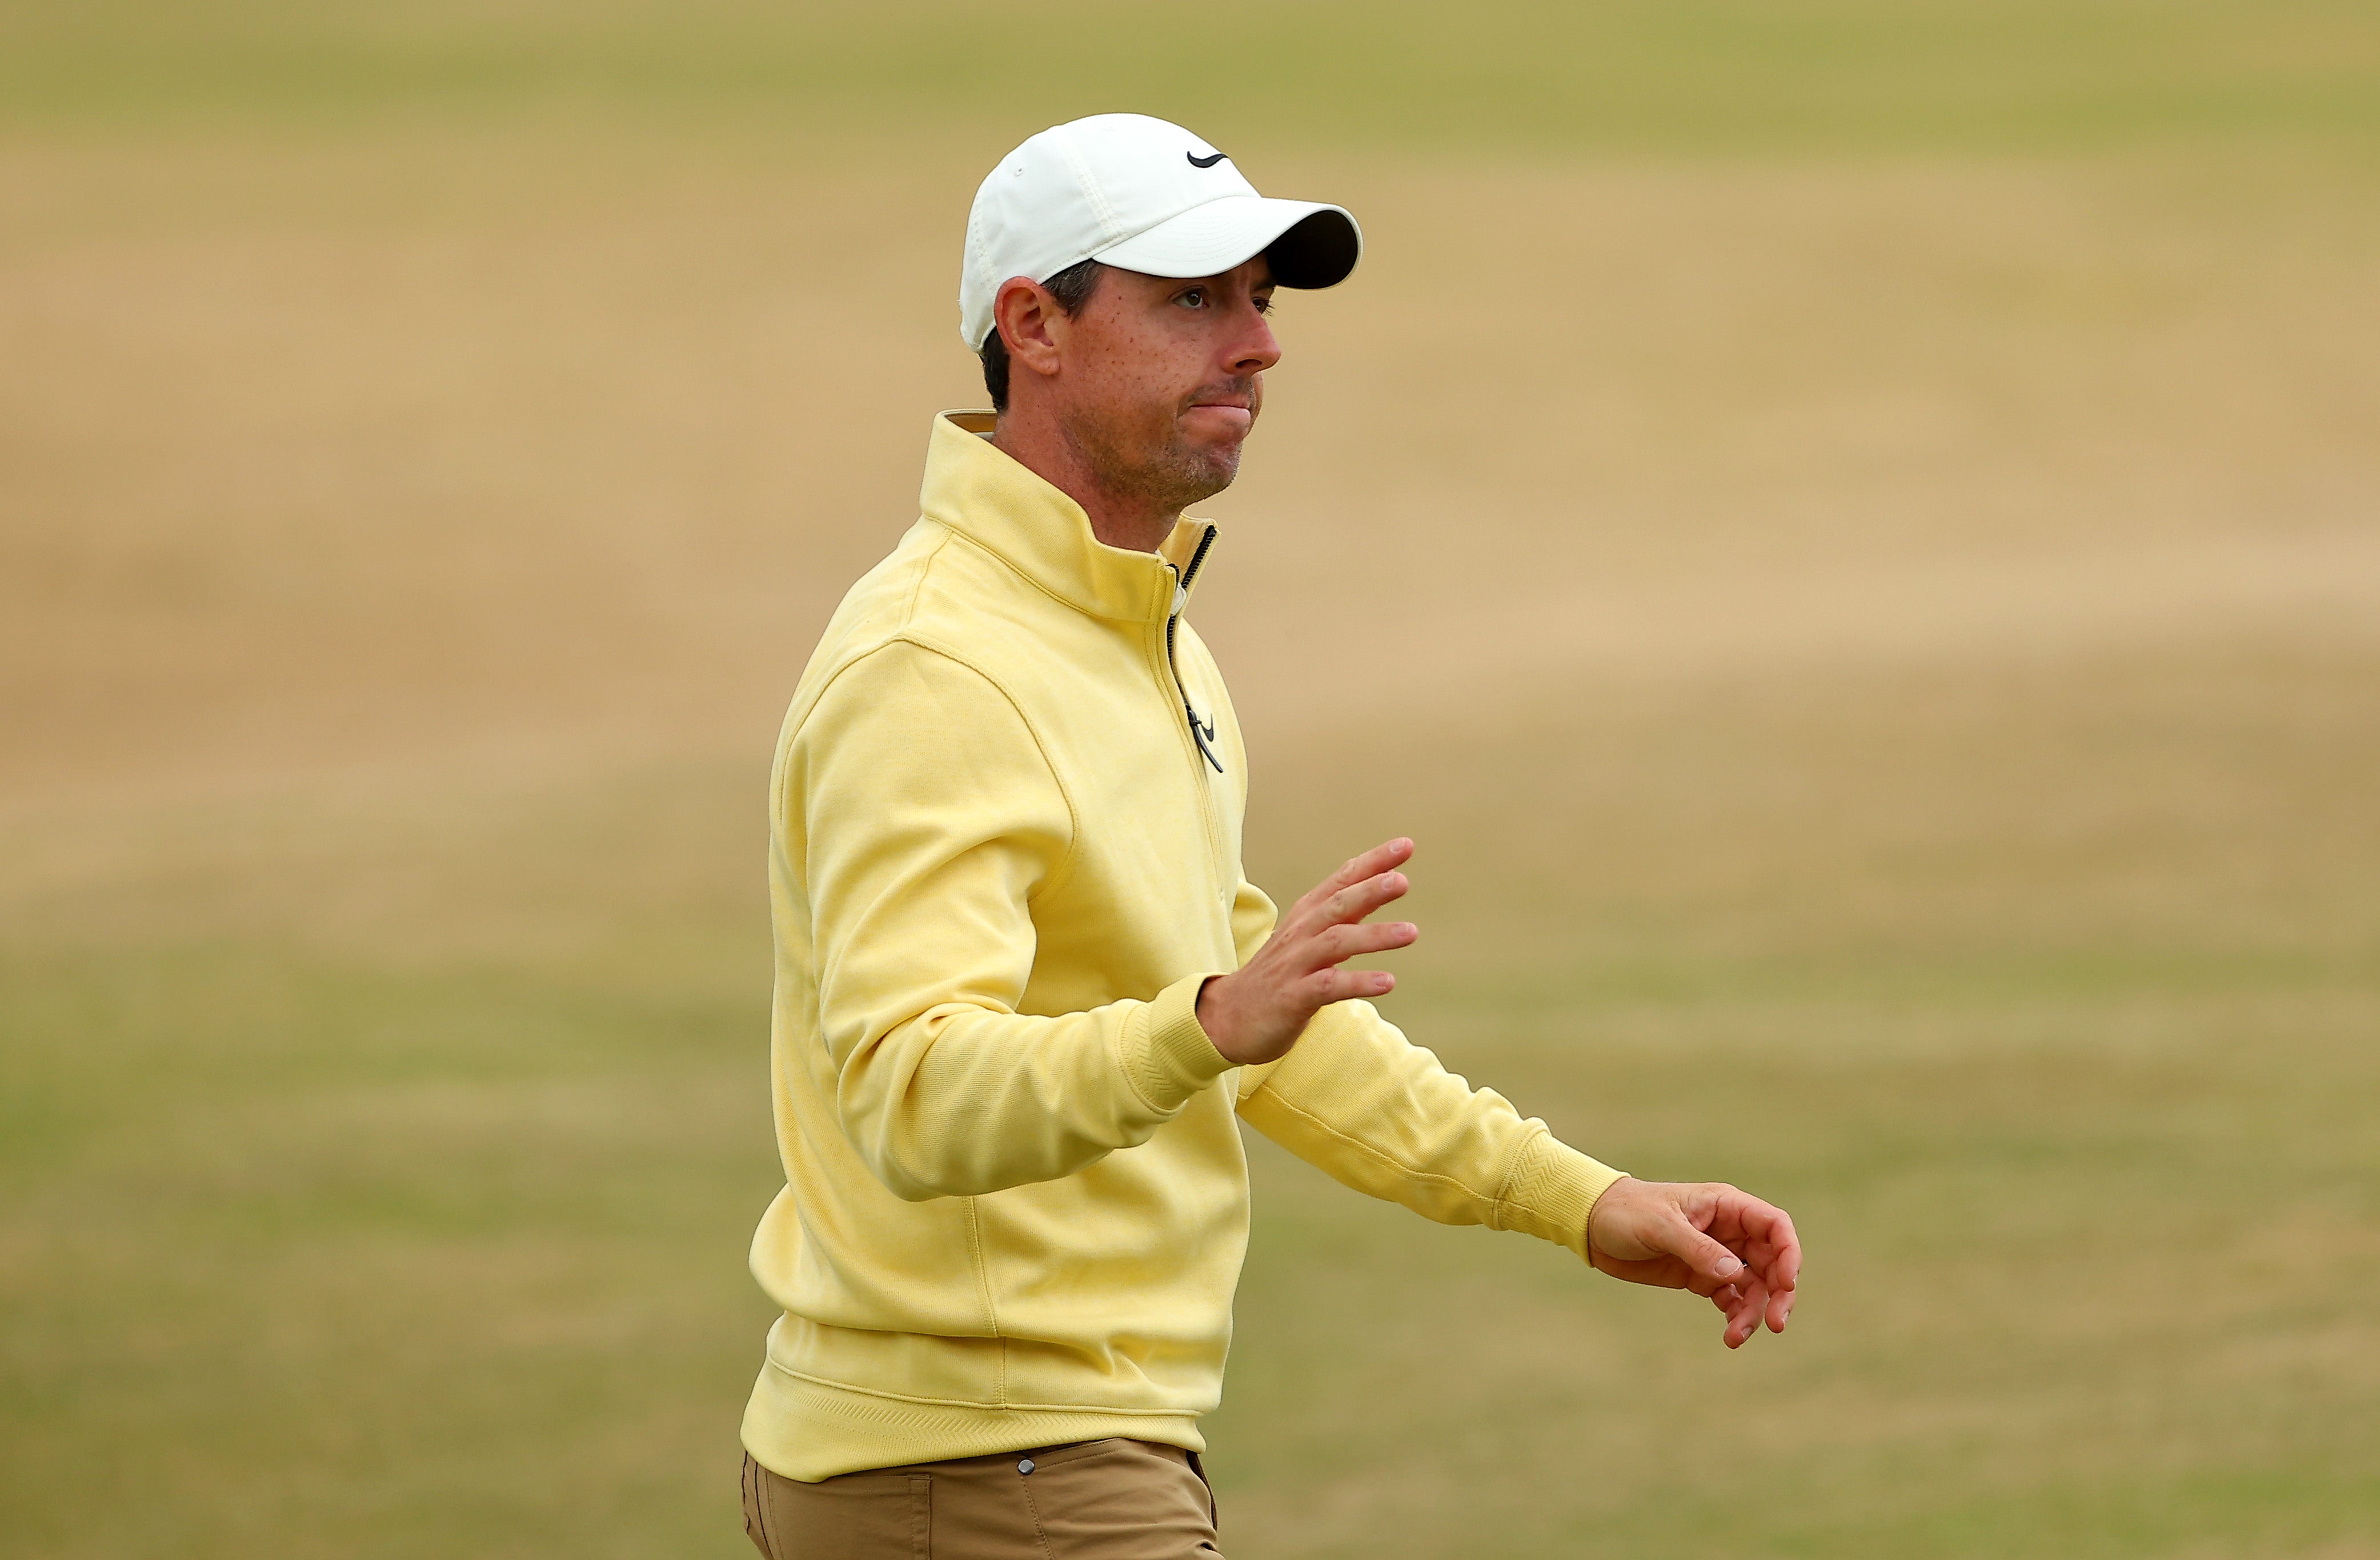 Rory McIlroy had a good day at St Andrews despite the mishap